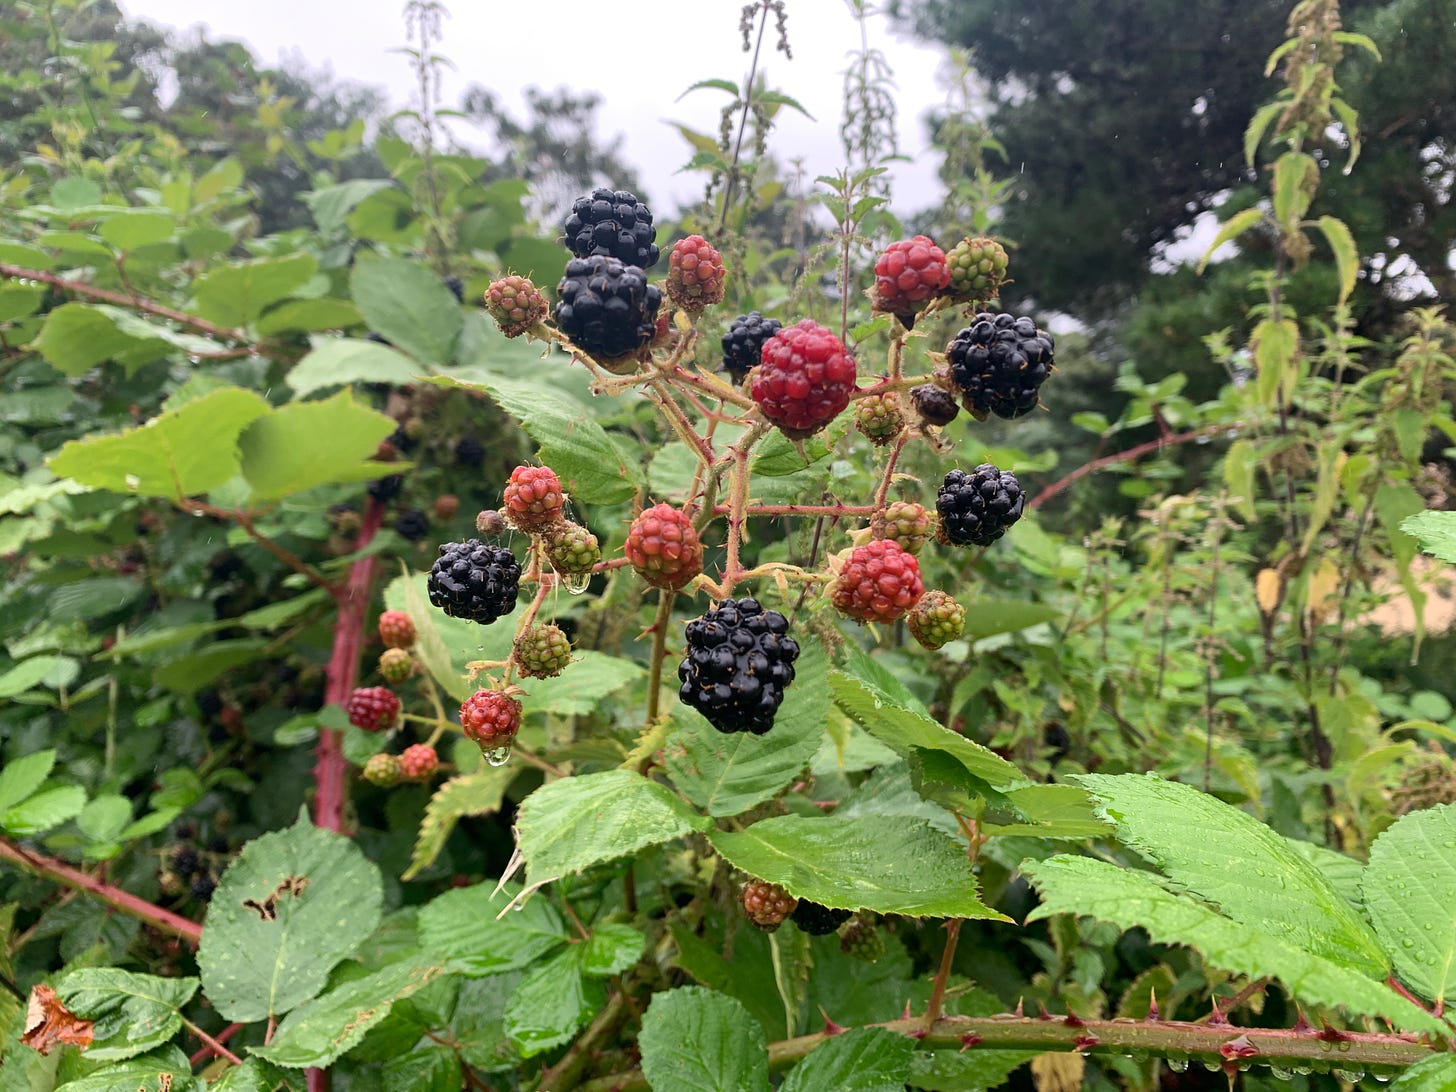 A handful of blackberries on the bush, some black and ripe, some red and unripe. In the background are the green leaves of the bush, grey sky and a tree